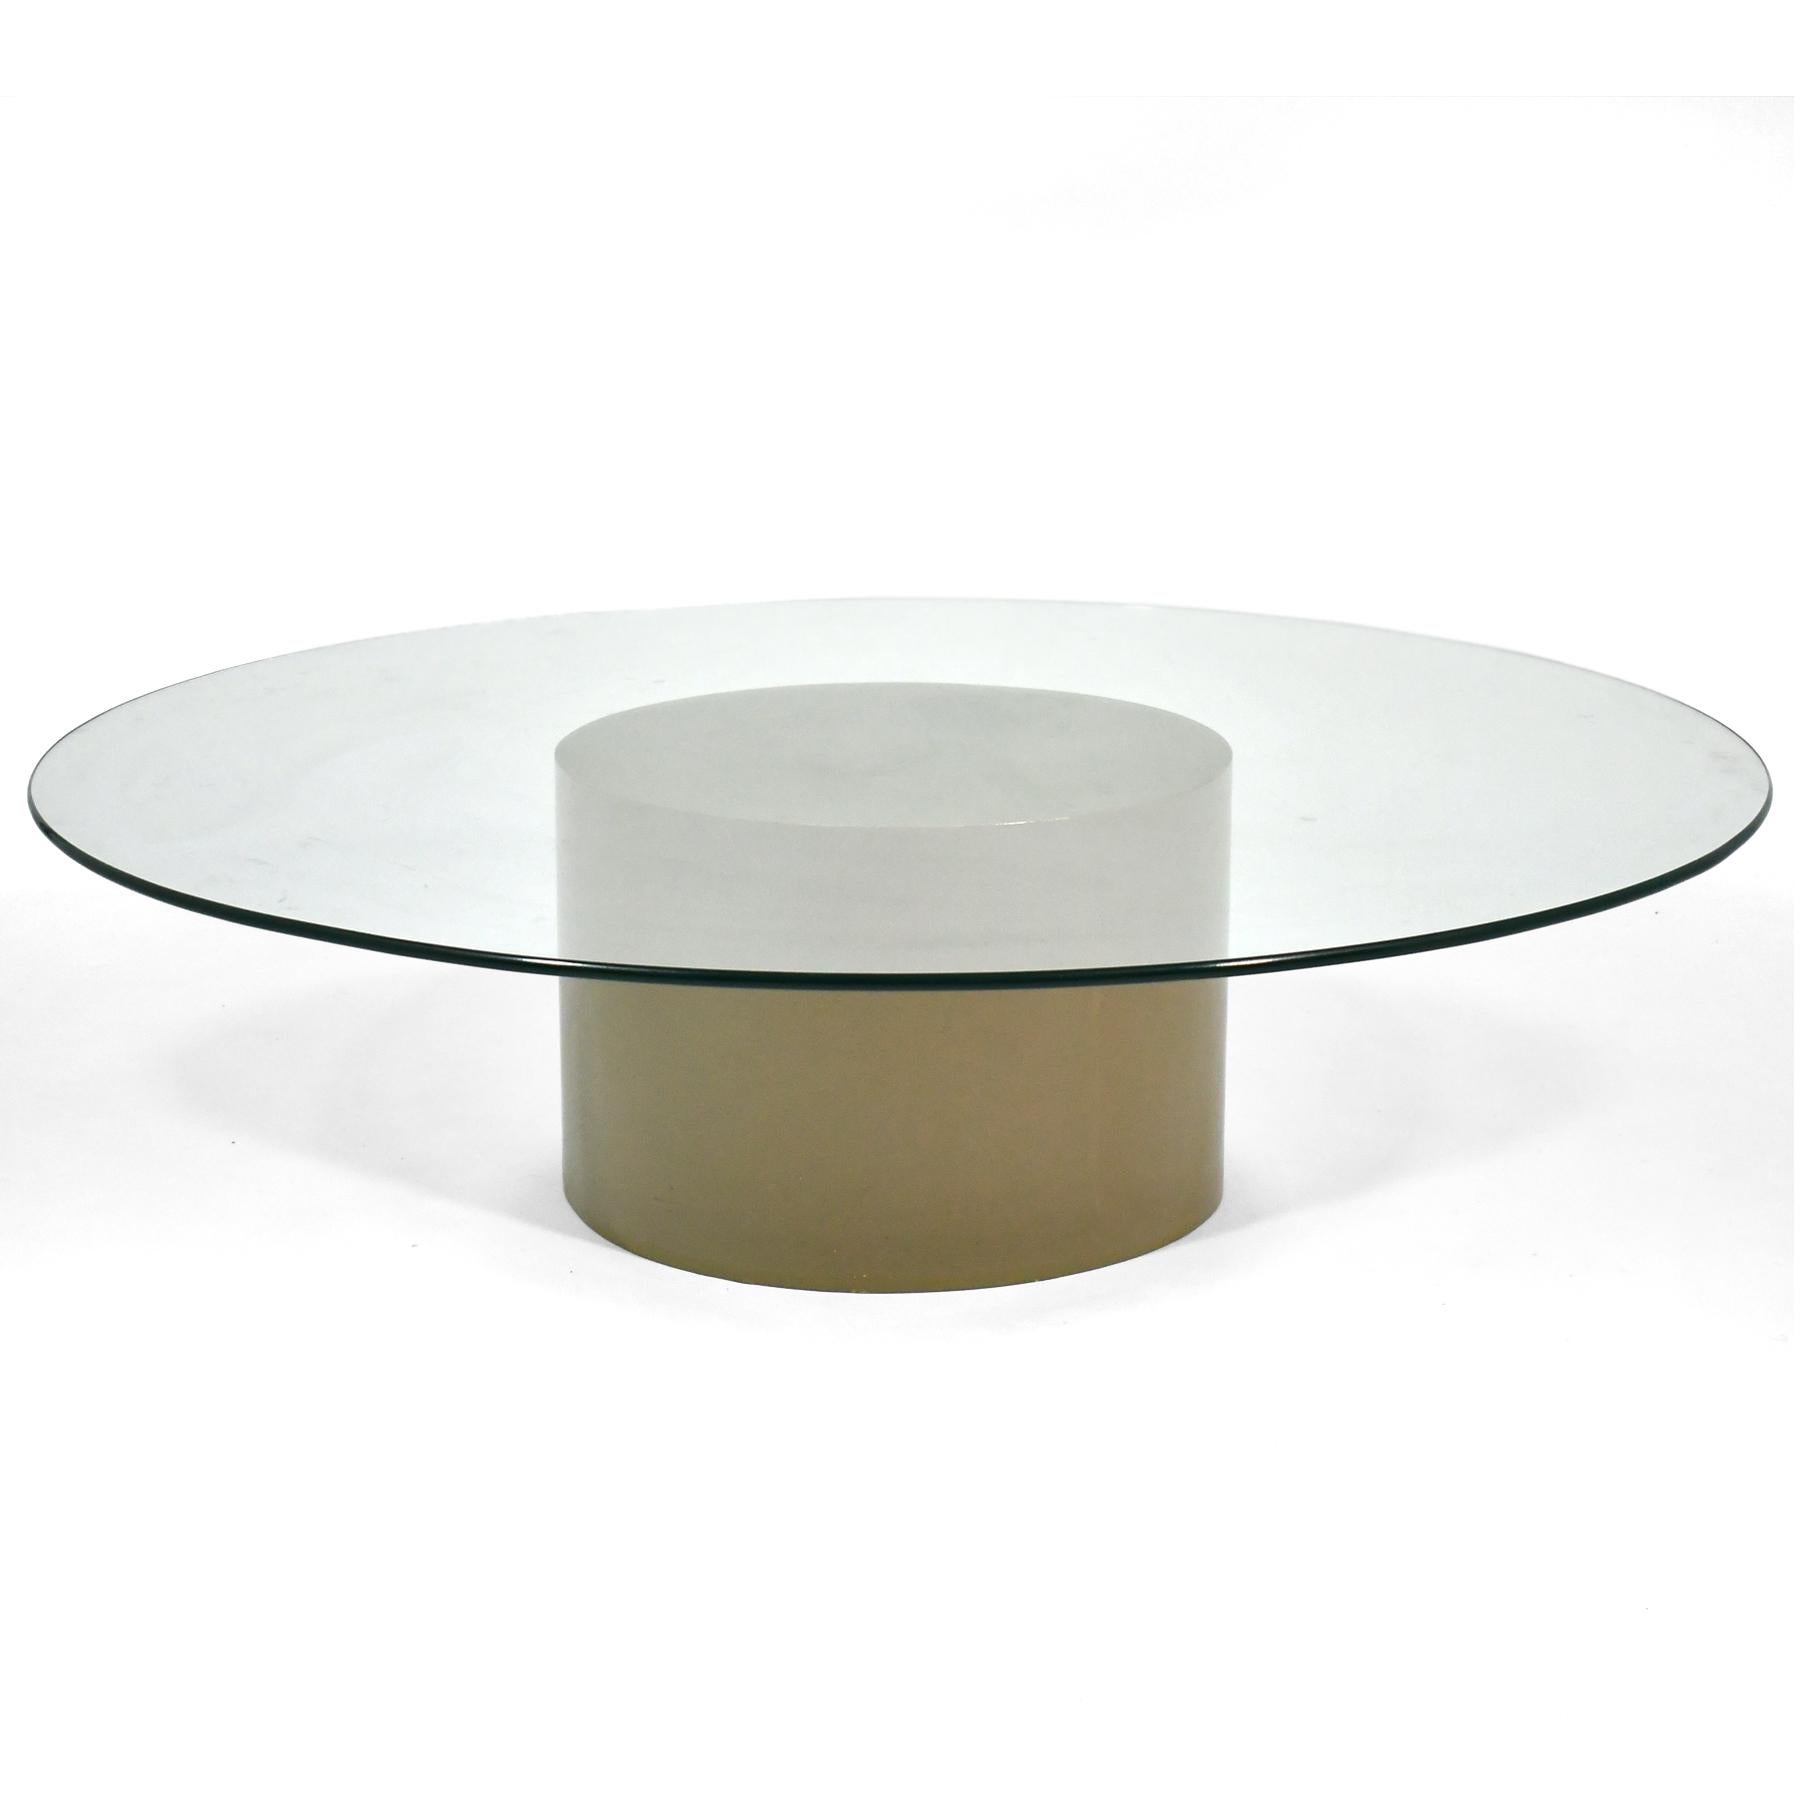 This Milo Baughman coffee table by Thayer Coggin features a cylindrical base of lacquered wood in a warm, putty colored gray with a large 54